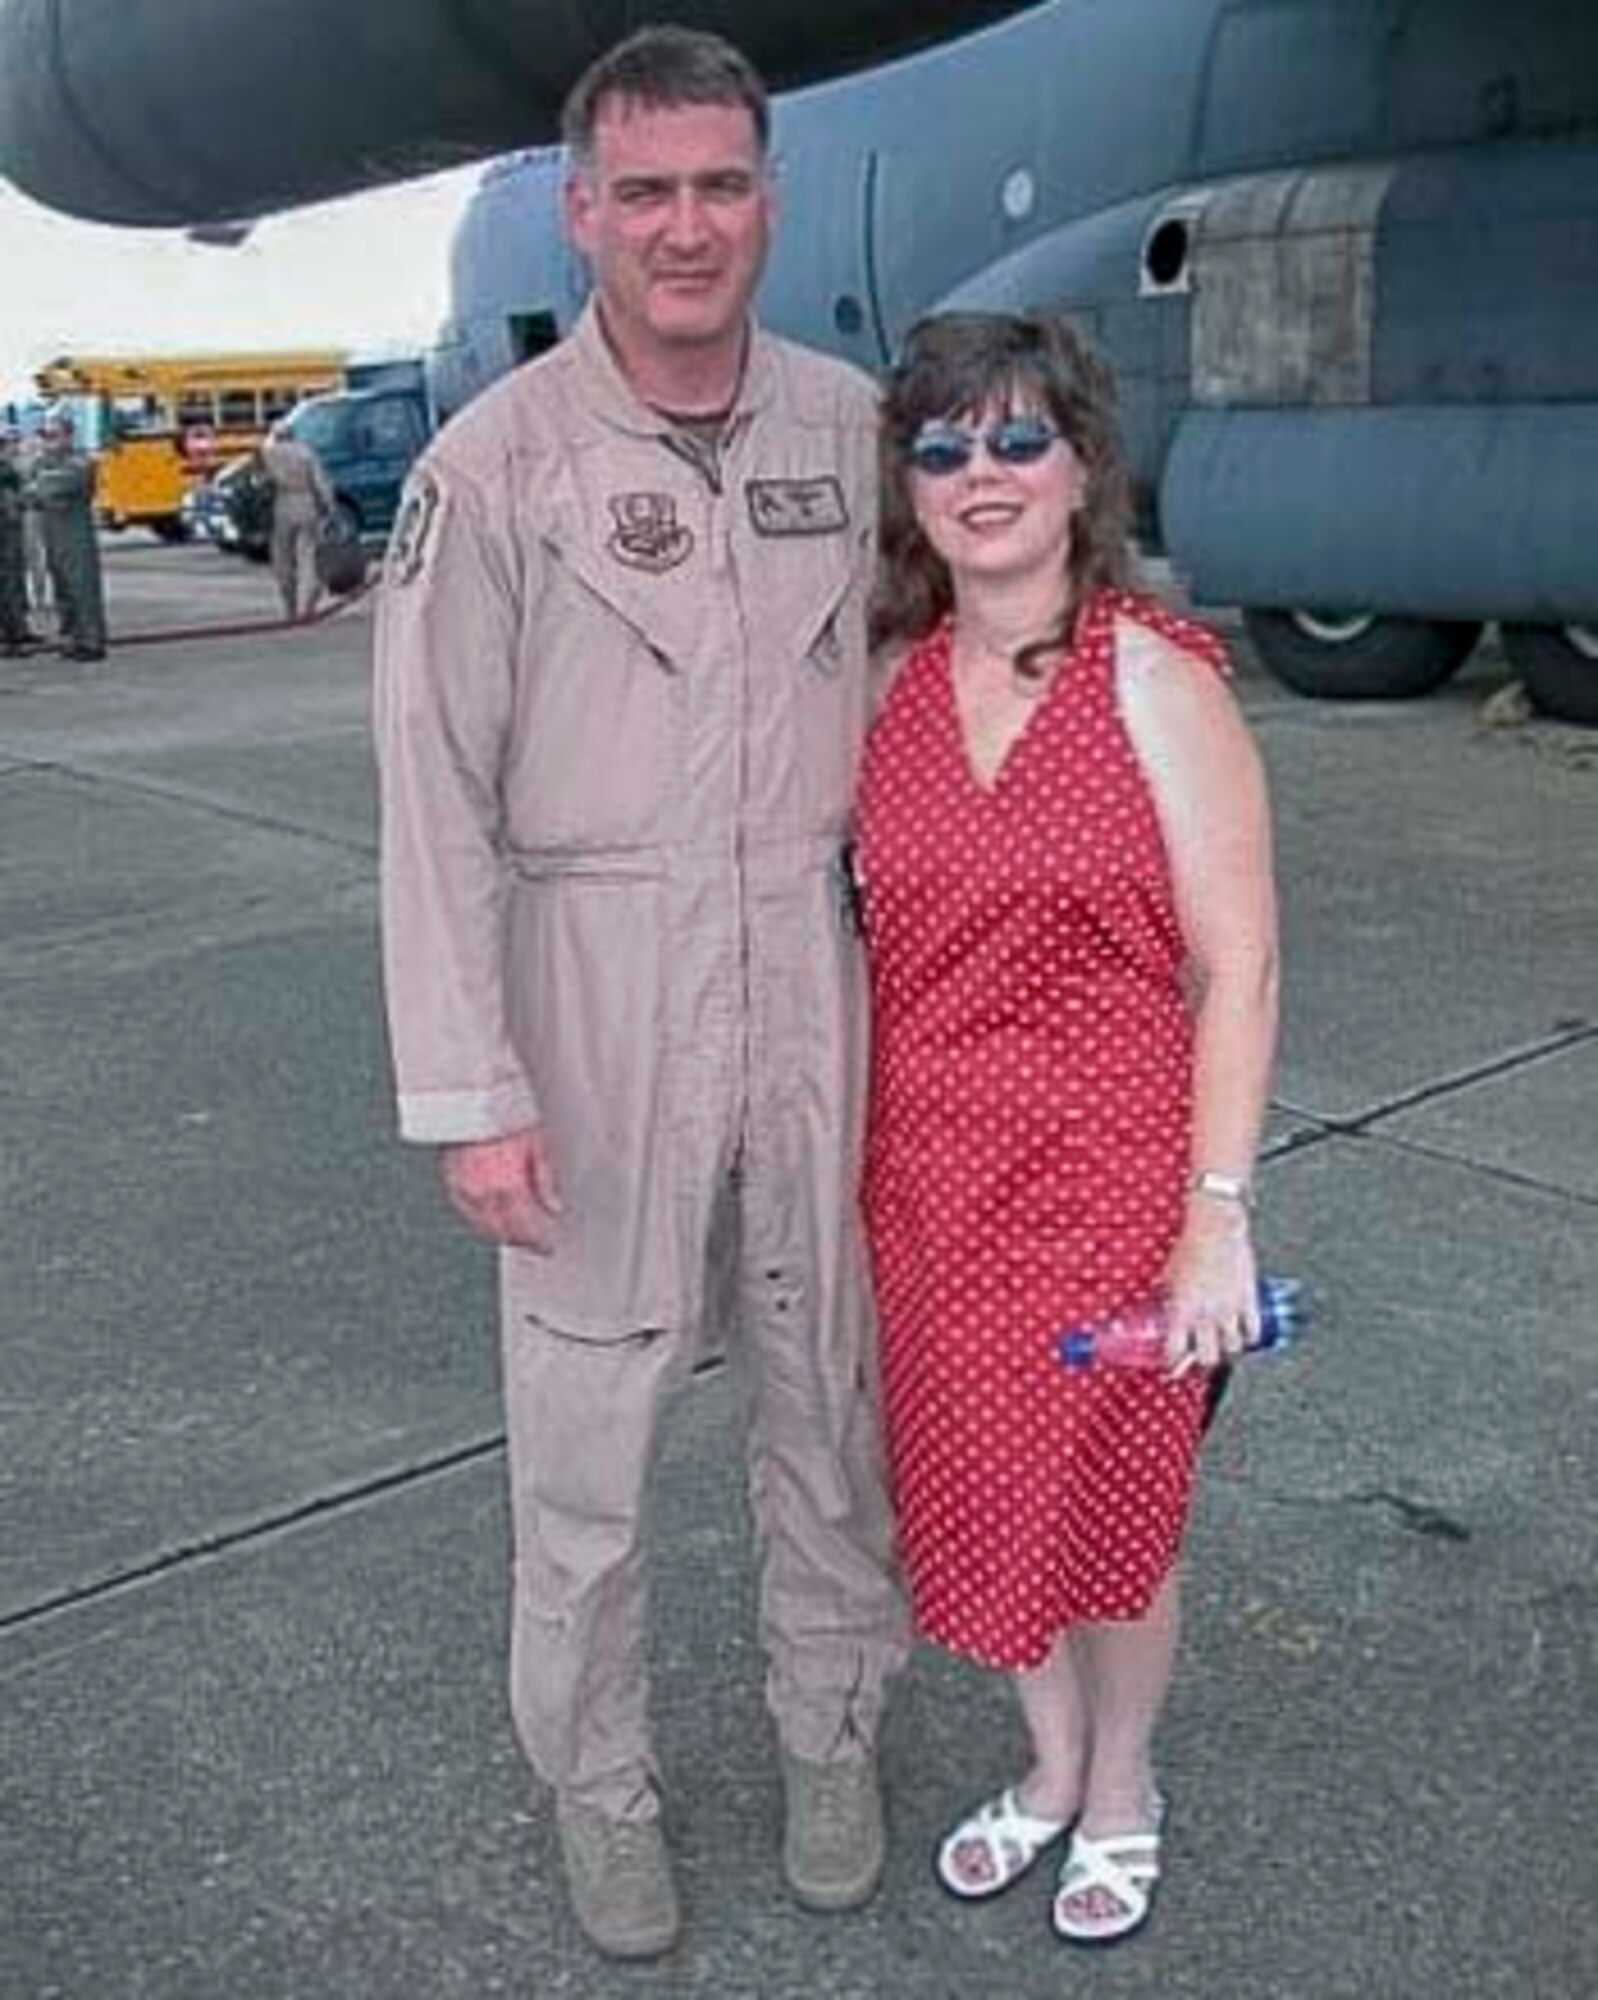 Air Force Reserve Chief Master Sgt. Donald Tarrance poses with his wife at Maxwell Air Force Base, Ala. after returning from a deployment in 2010. Prior to being a loadmaster, Tarrance also served as an aeromedical evacuation technician, flight medical aidman, and a jumpmaster. (Courtesy photo)